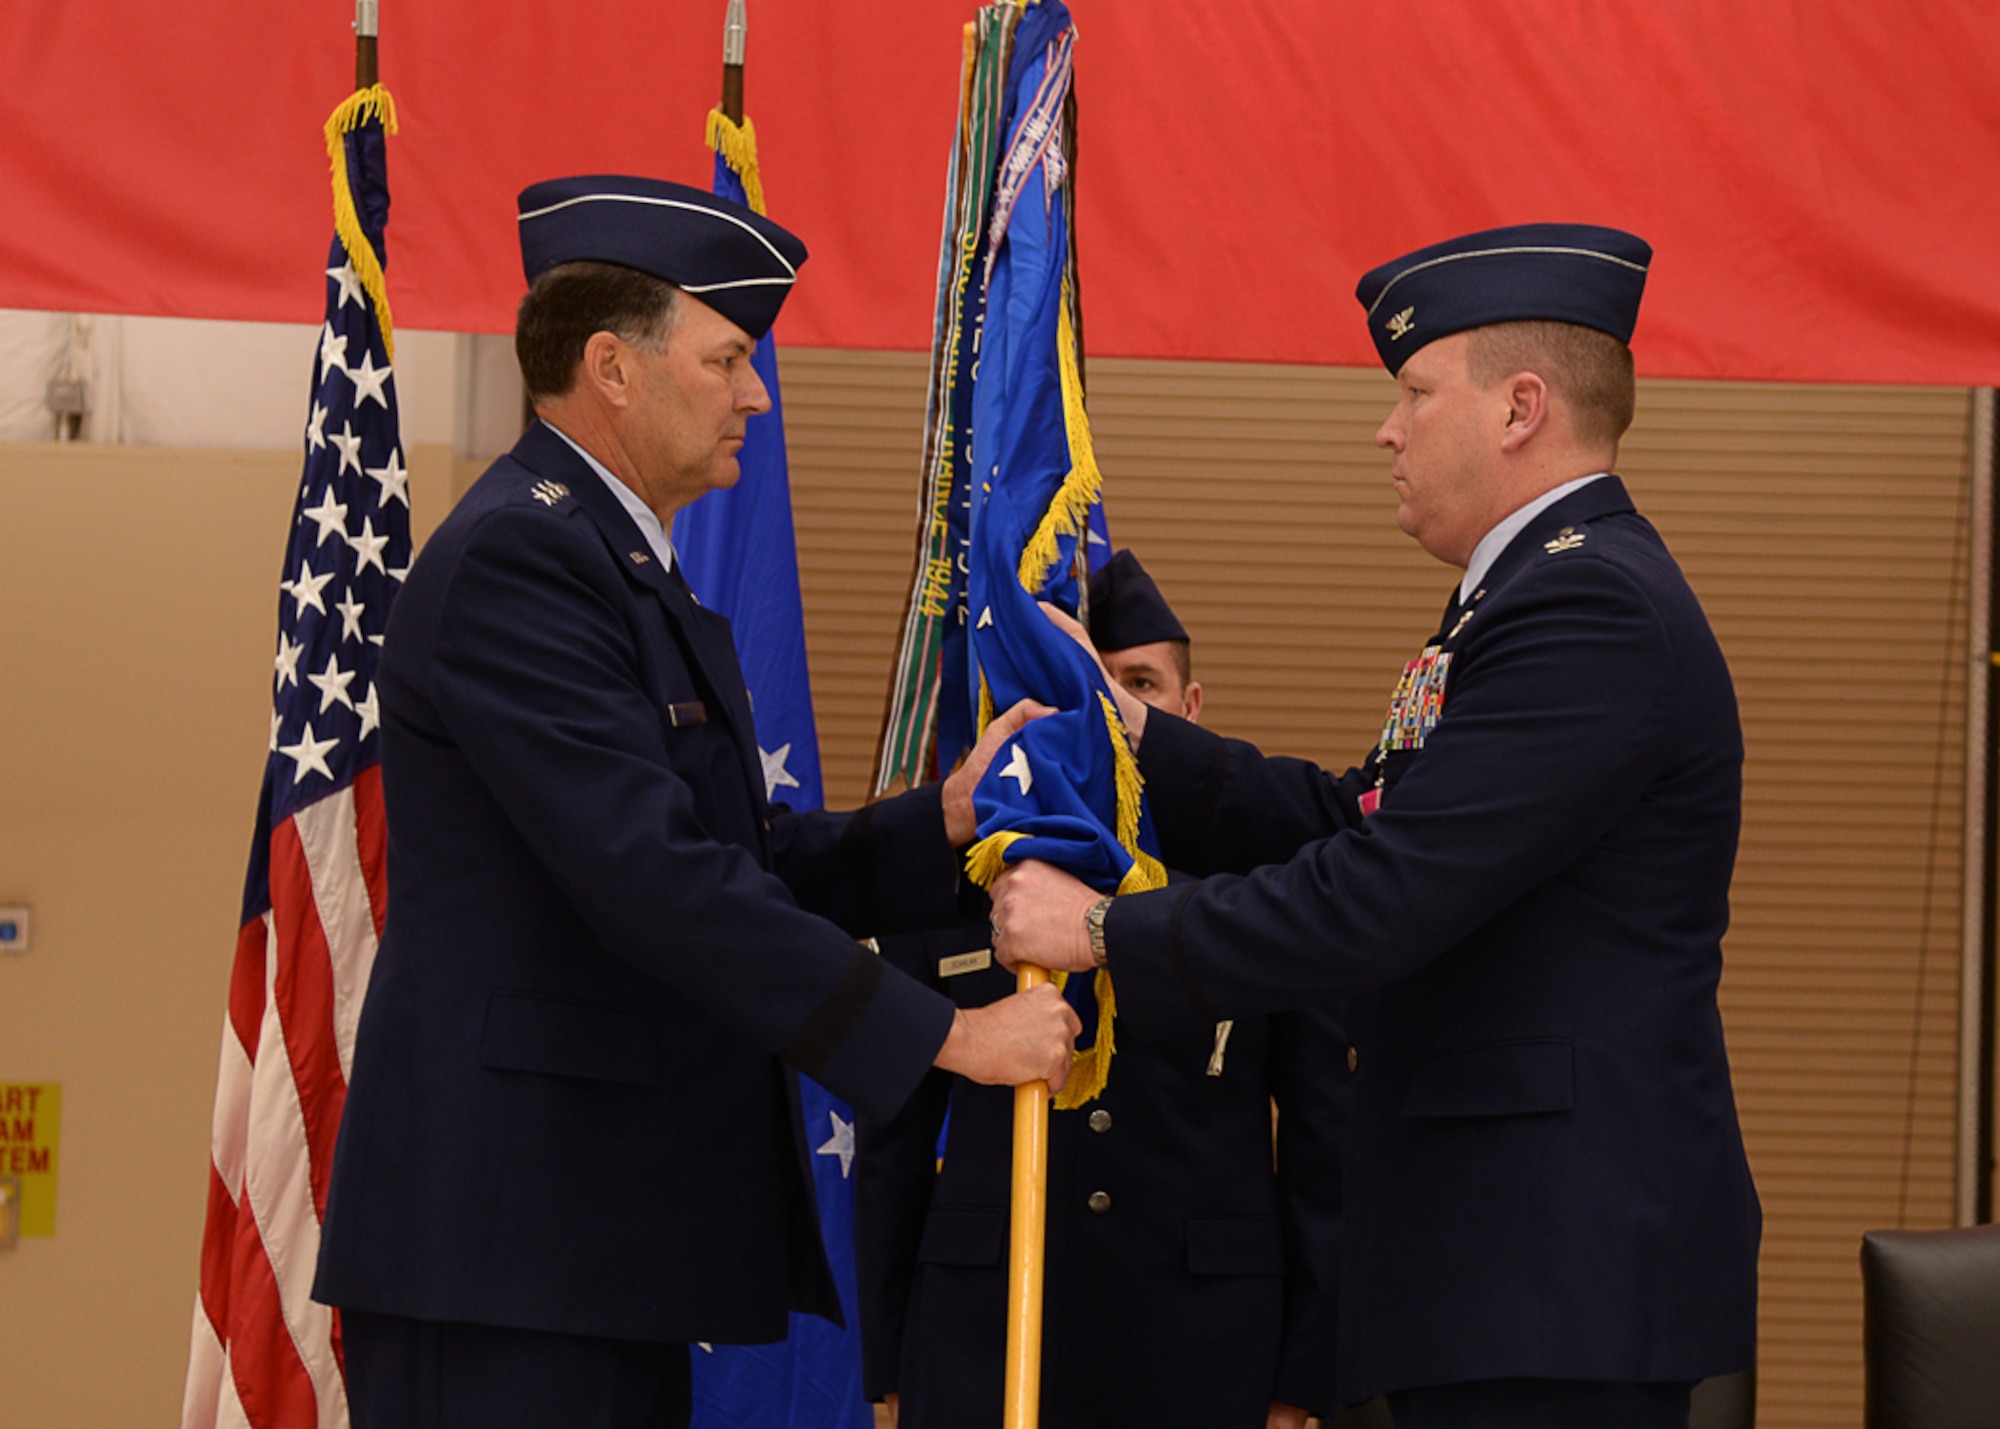 U.S. Air Force Lt. Gen. Bradley Heithold, Commander Air Force Special Operations Command, accepts the relinquishment of command from Col. Tony Bauernfeind, outgoing 27th Special Operations Wing commander, Feb. 17, 2015 at Cannon Air Force Base, N.M.  Bauernfeind was recognized for creating a first-class environment for Air Commandos and their families to thrive while leading the U.S. Air Force’s most relevant wing.  (U.S. Air Force photo/Airman 1st Class Chip Slack) 